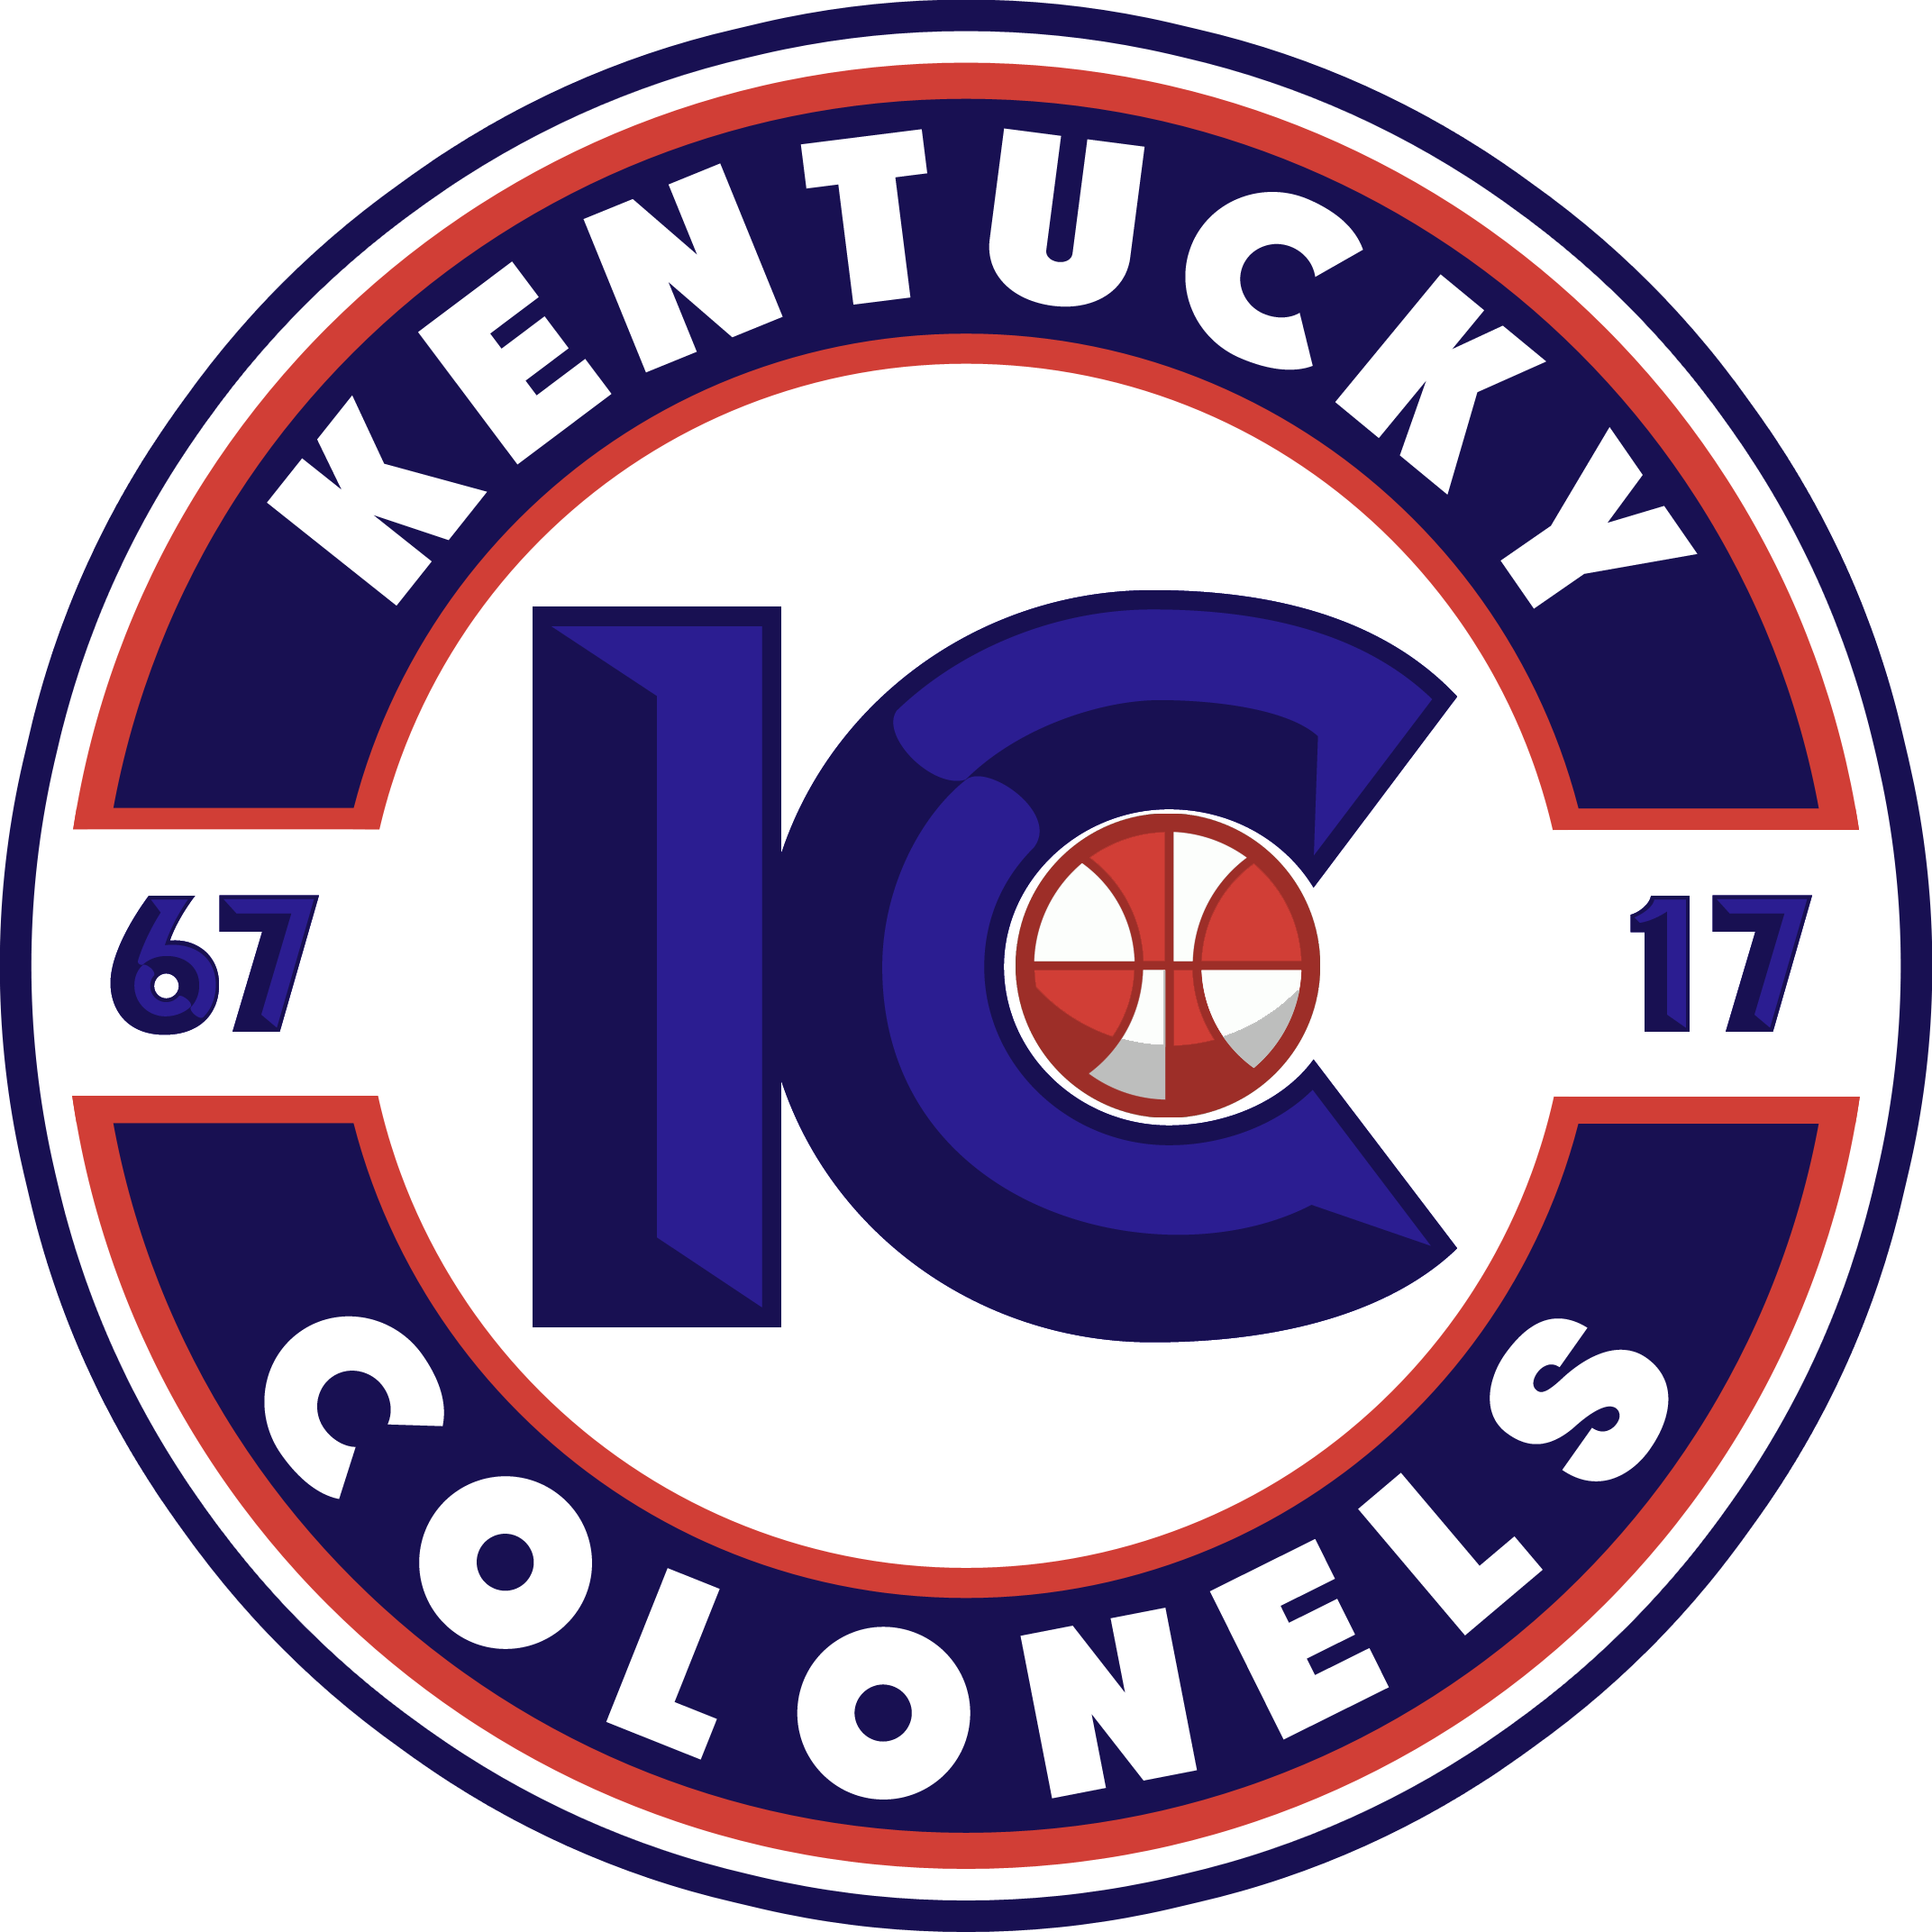 Kc Primary - Kentucky Colonels Nba 2k17 (2144x2144), Png Download